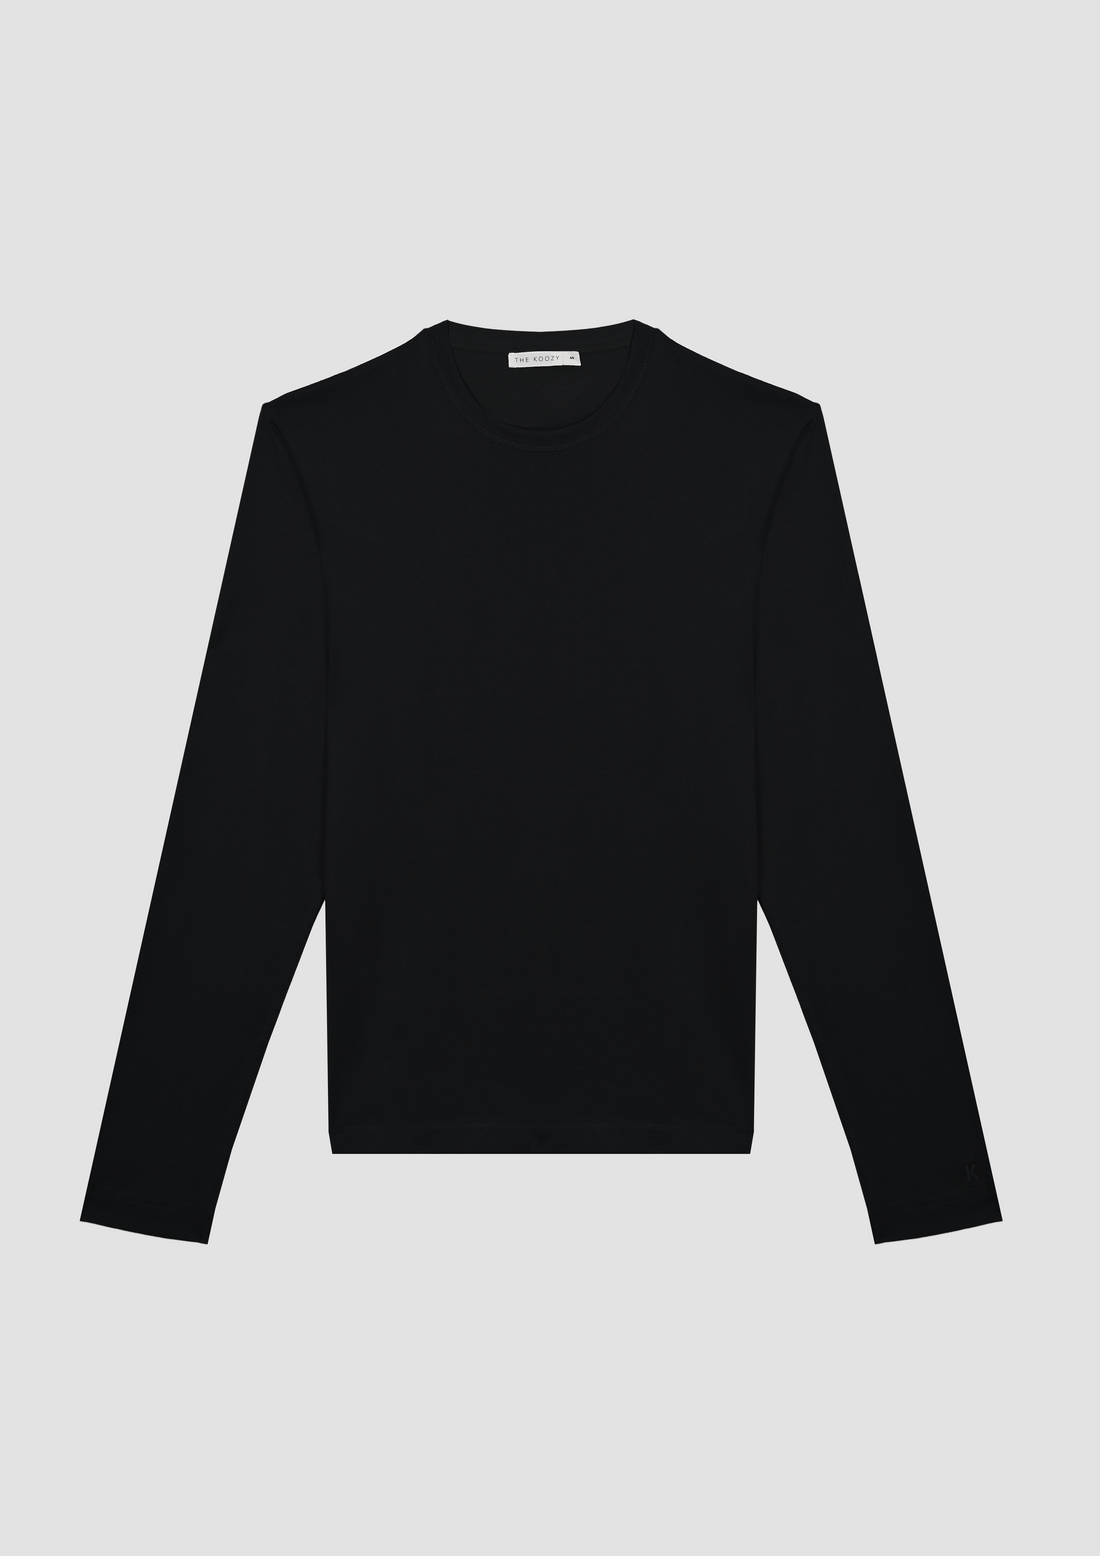 Tate Long Sleeve in Cotton PG in Black